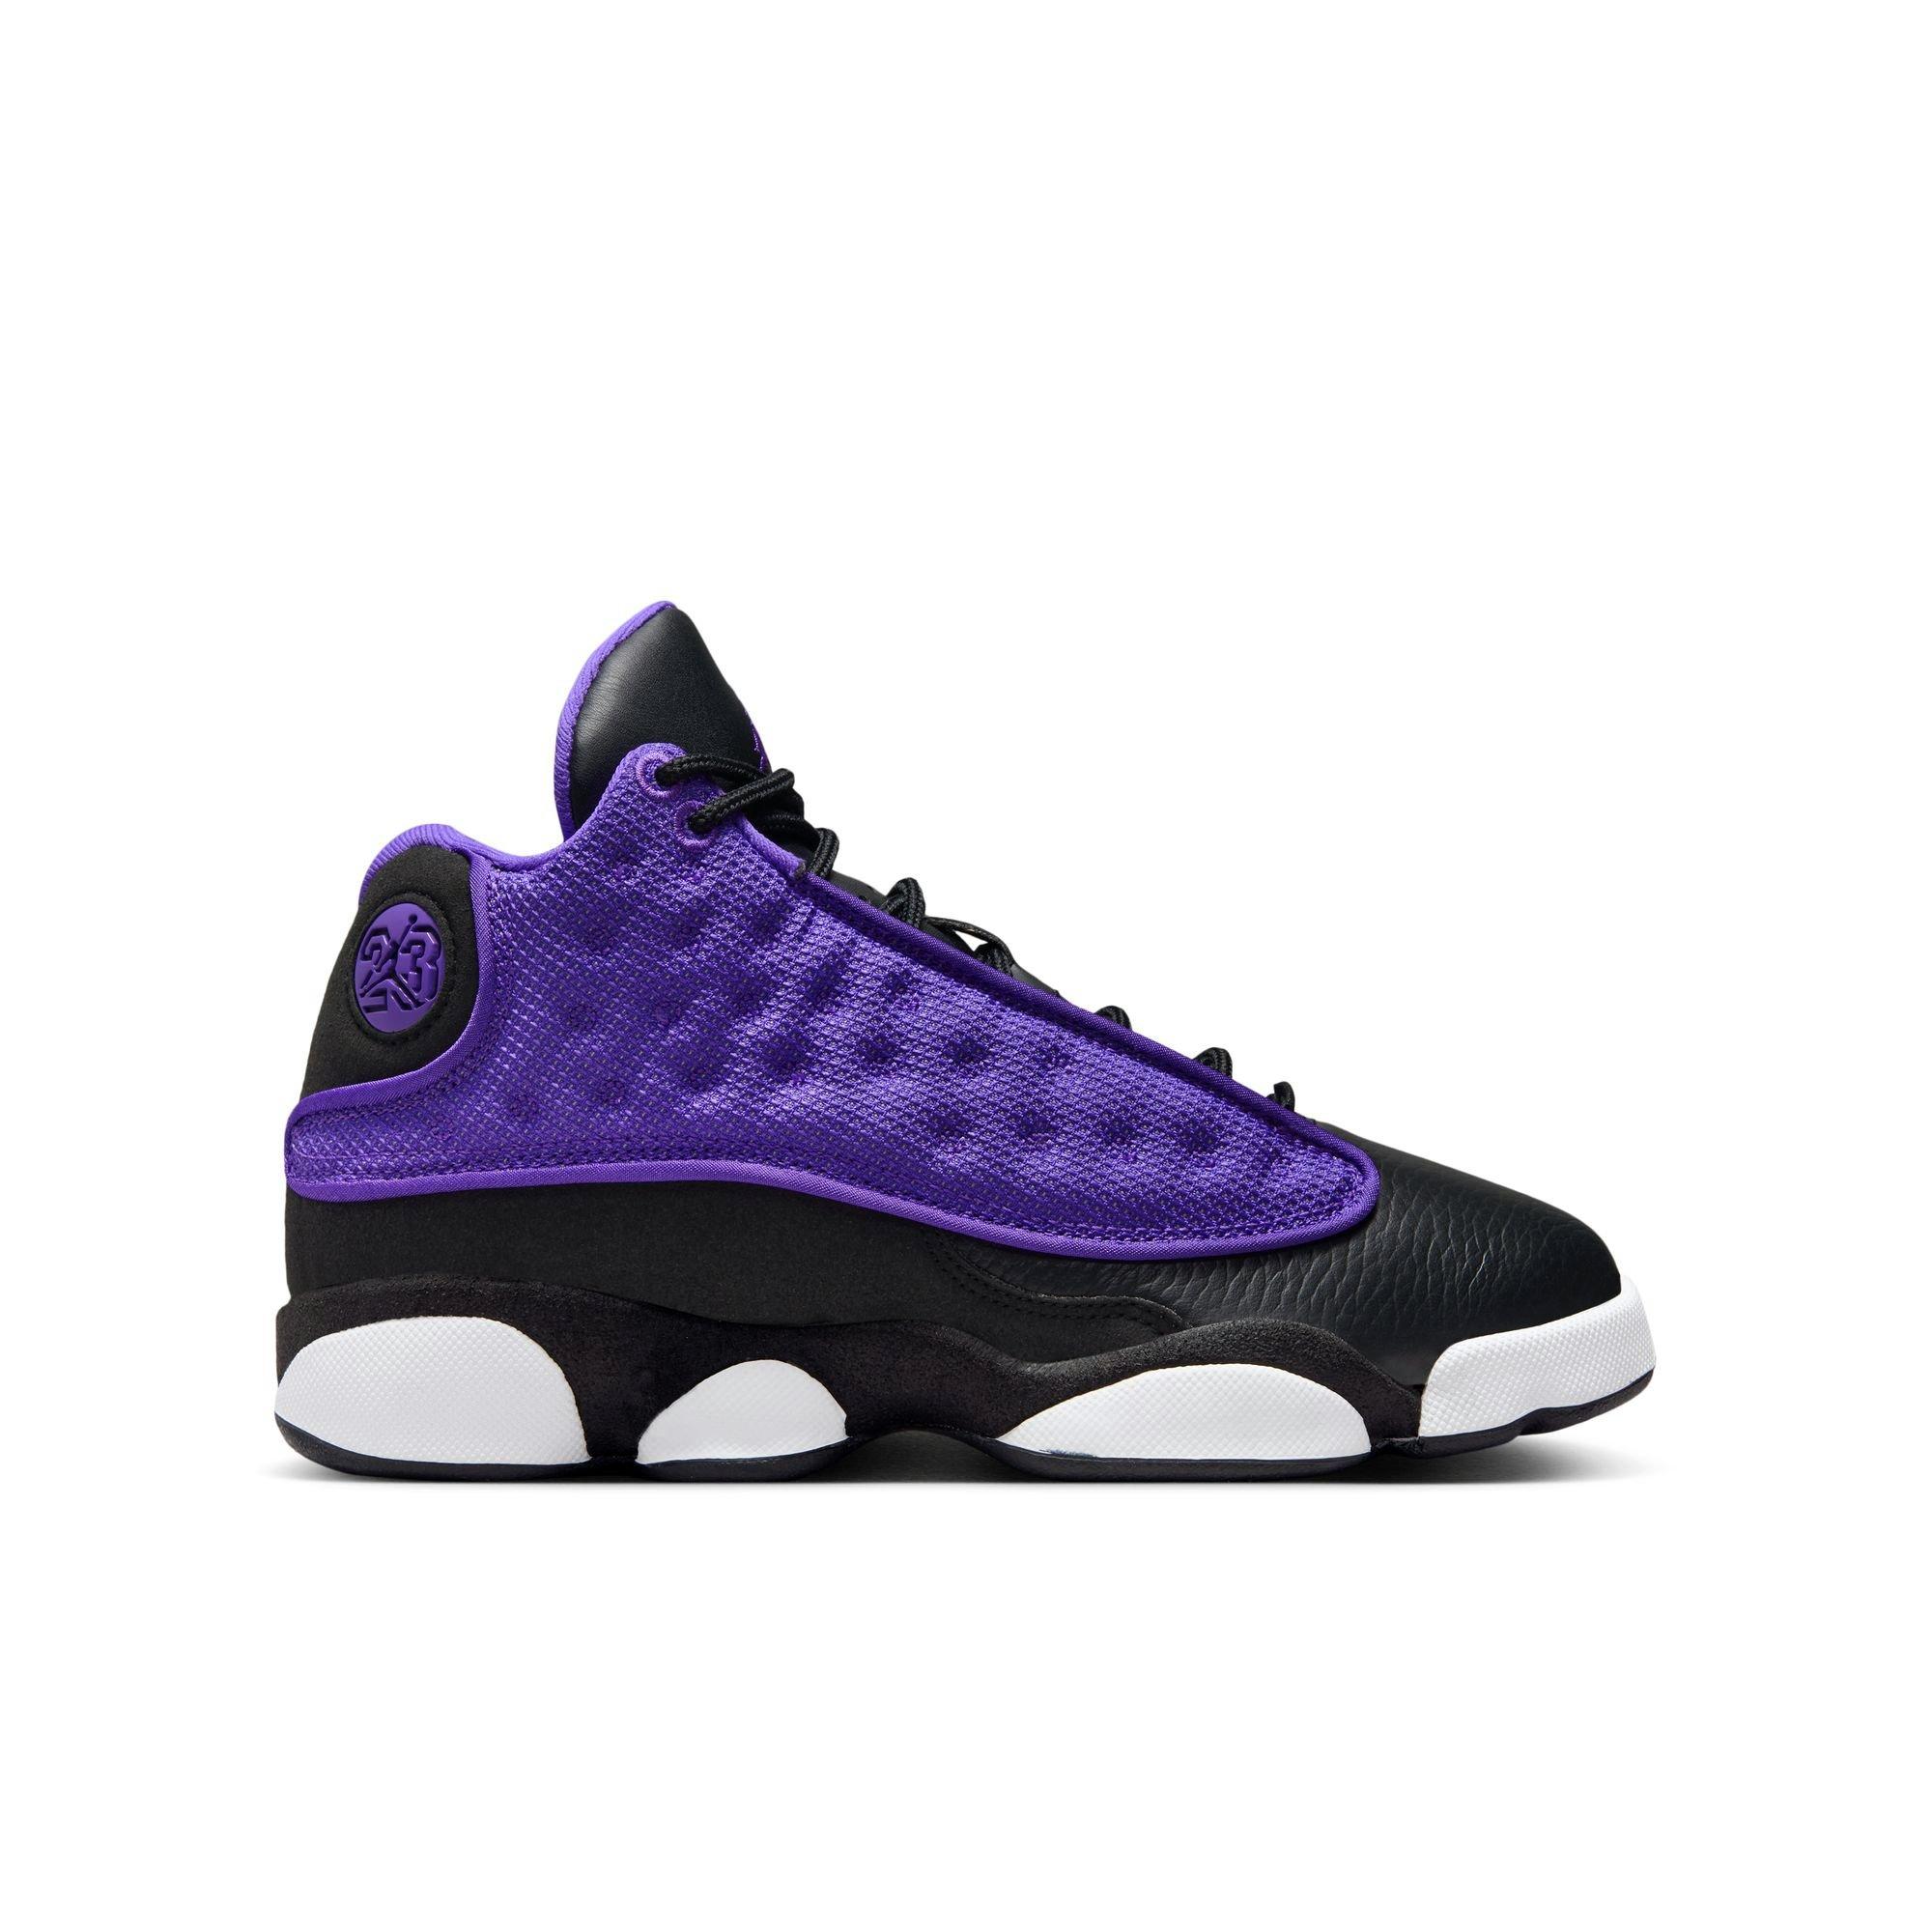 Kids' Stormy Lace-Up Performance Sneakers - All in Motion Black/Purple 13